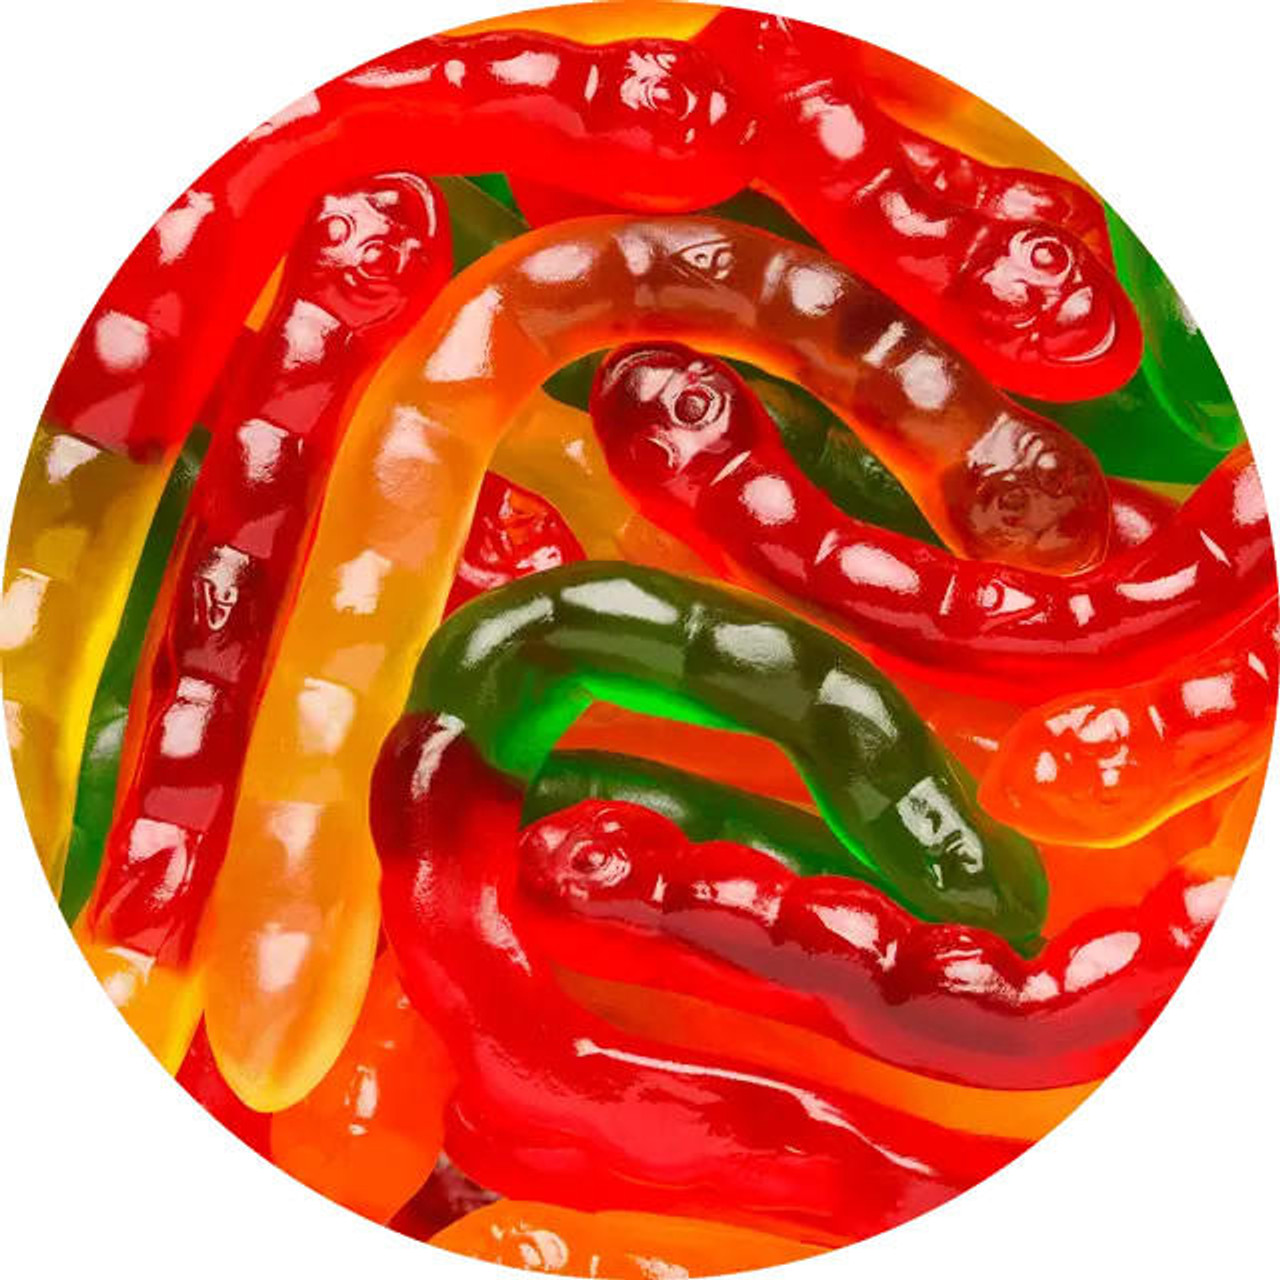  Albanese Large Assorted Fruit Gummi Worms 5 lb. - 4/Case Sweet Giant Gummy Worms 